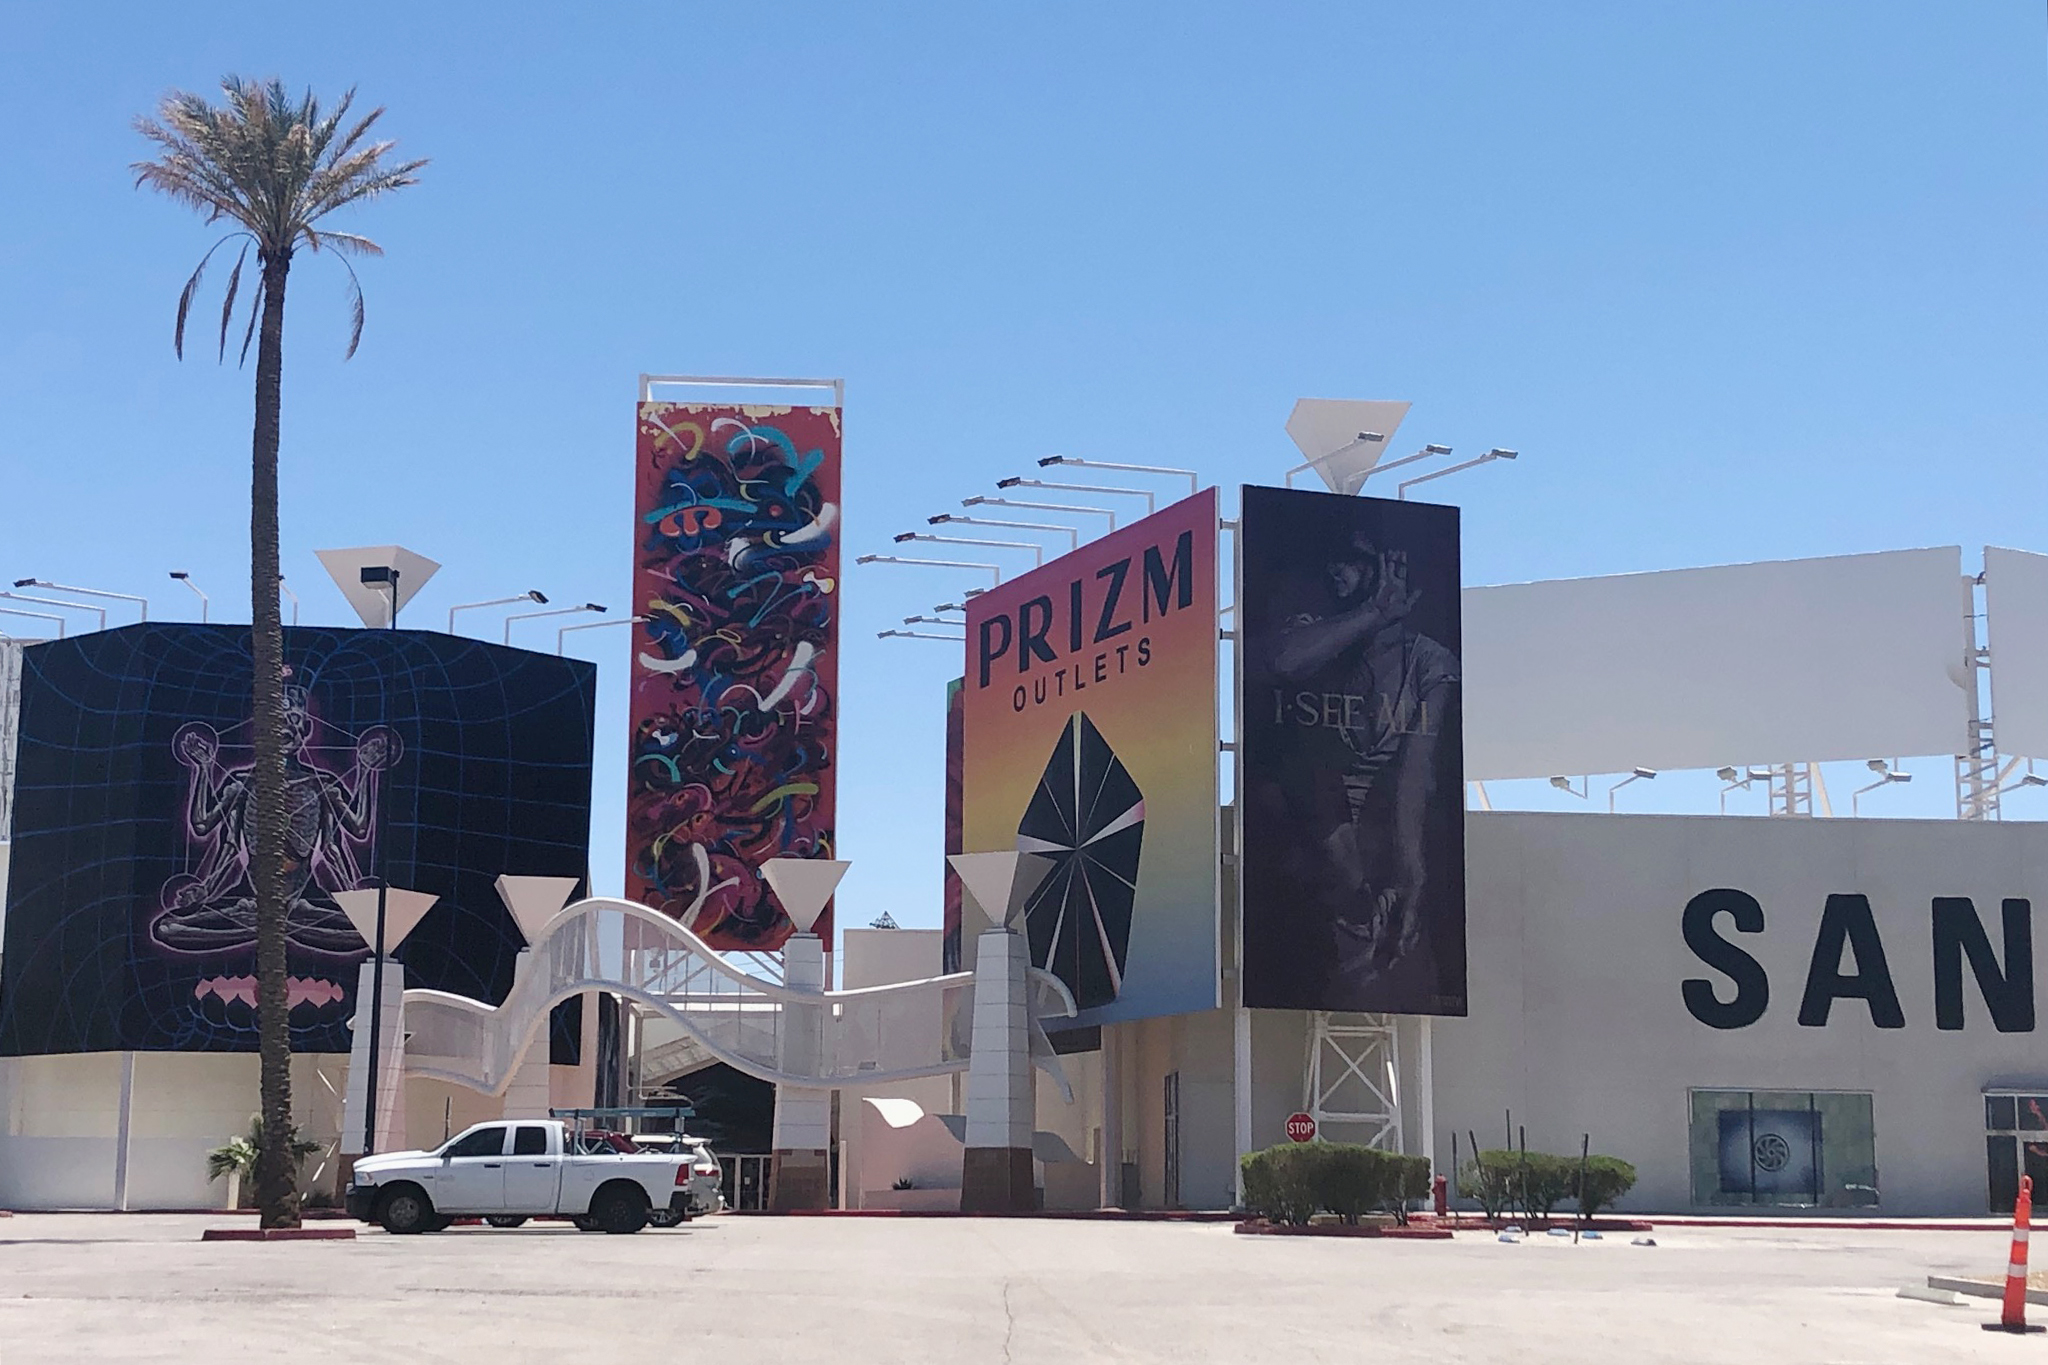 Prizm Outlets is one of the best places to shop in Las Vegas